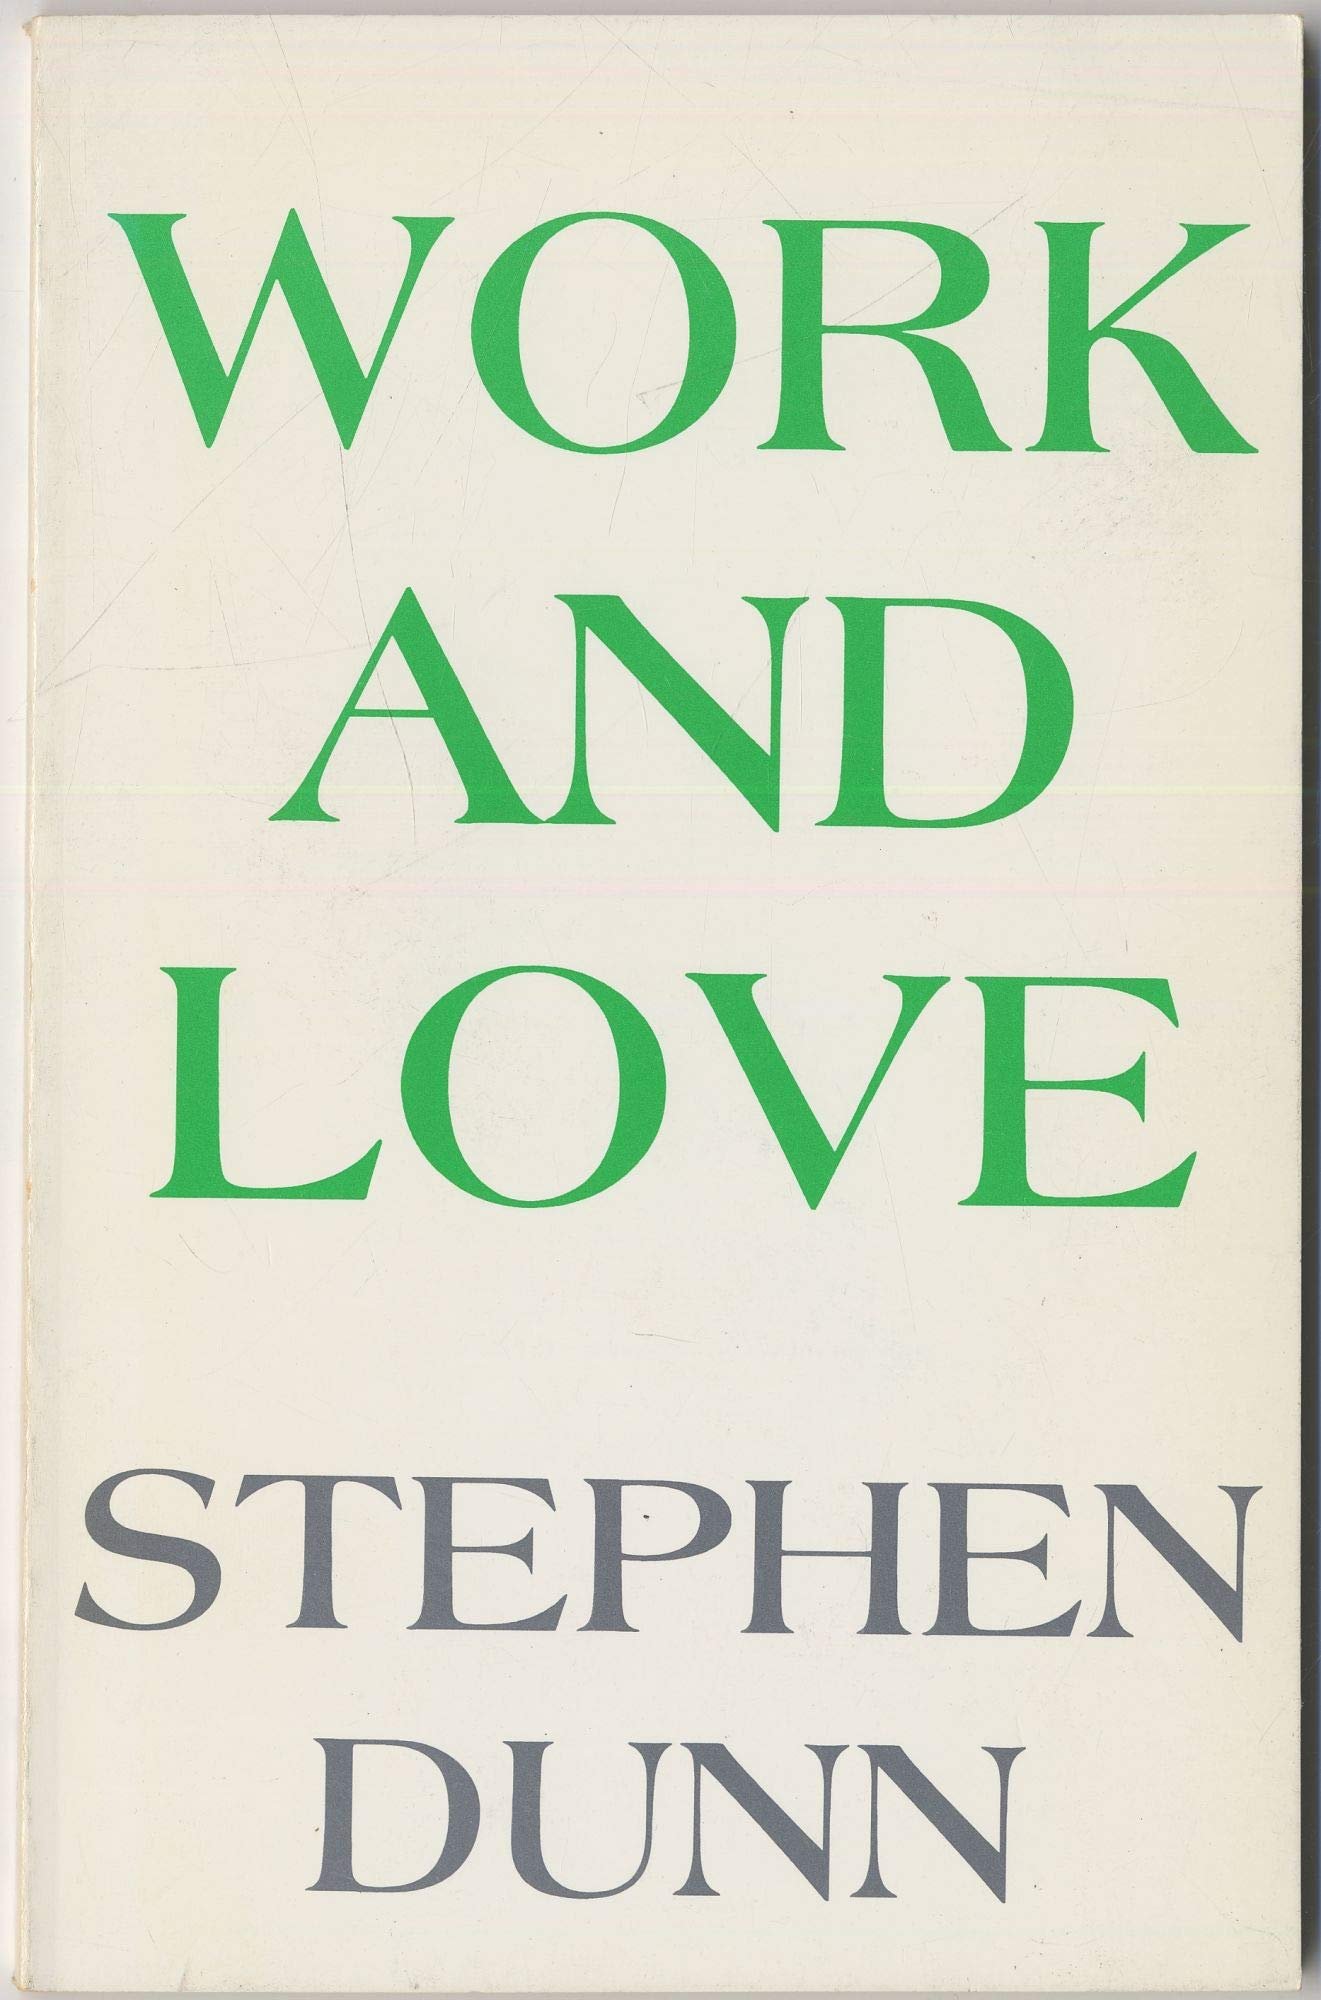 Work and Love